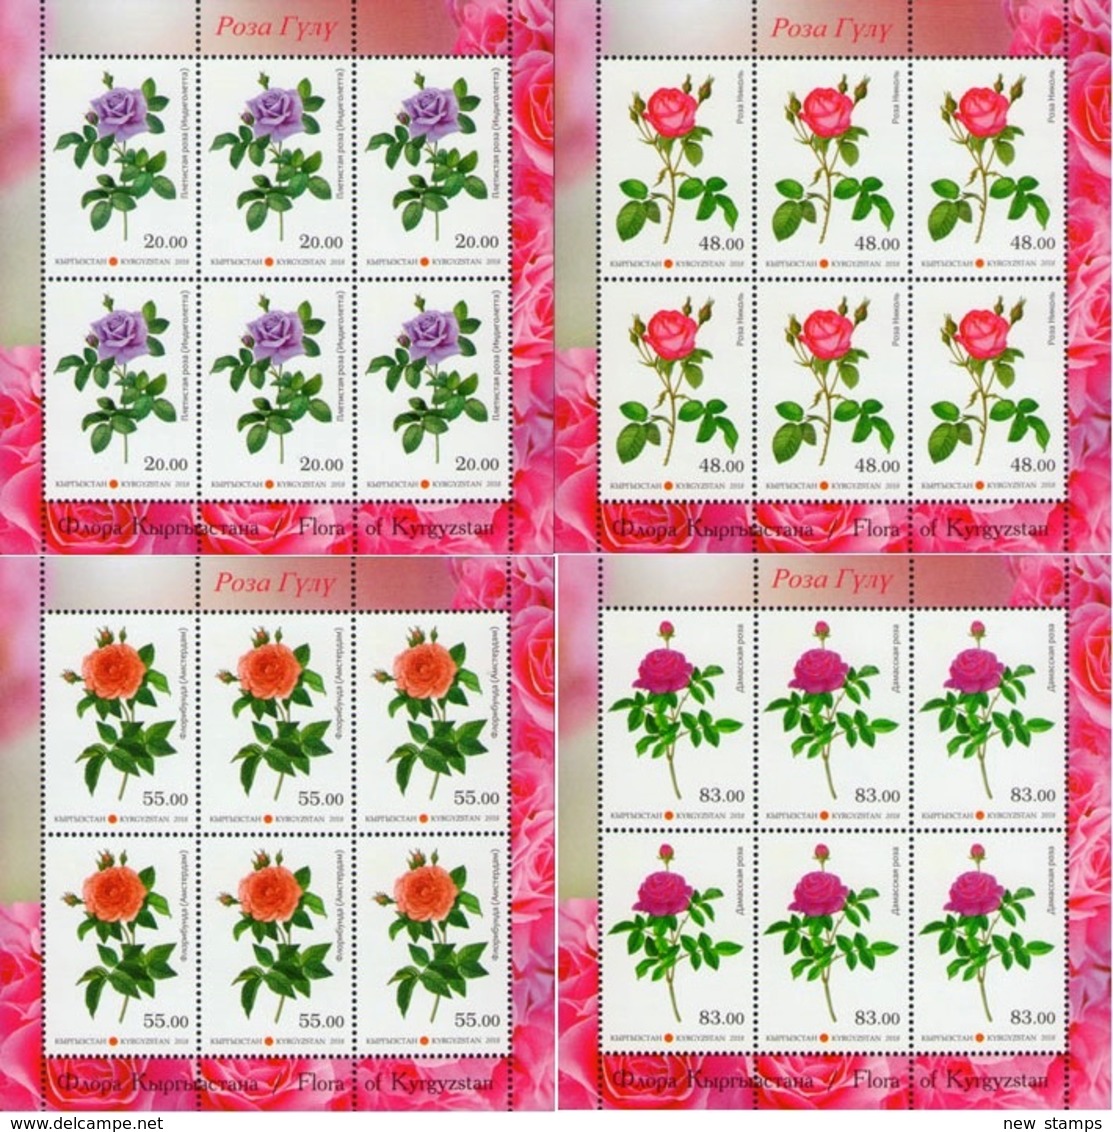 Kyrgyzstan 2018 Flora Flowers Roses 4 Minisheets MNH - Roses